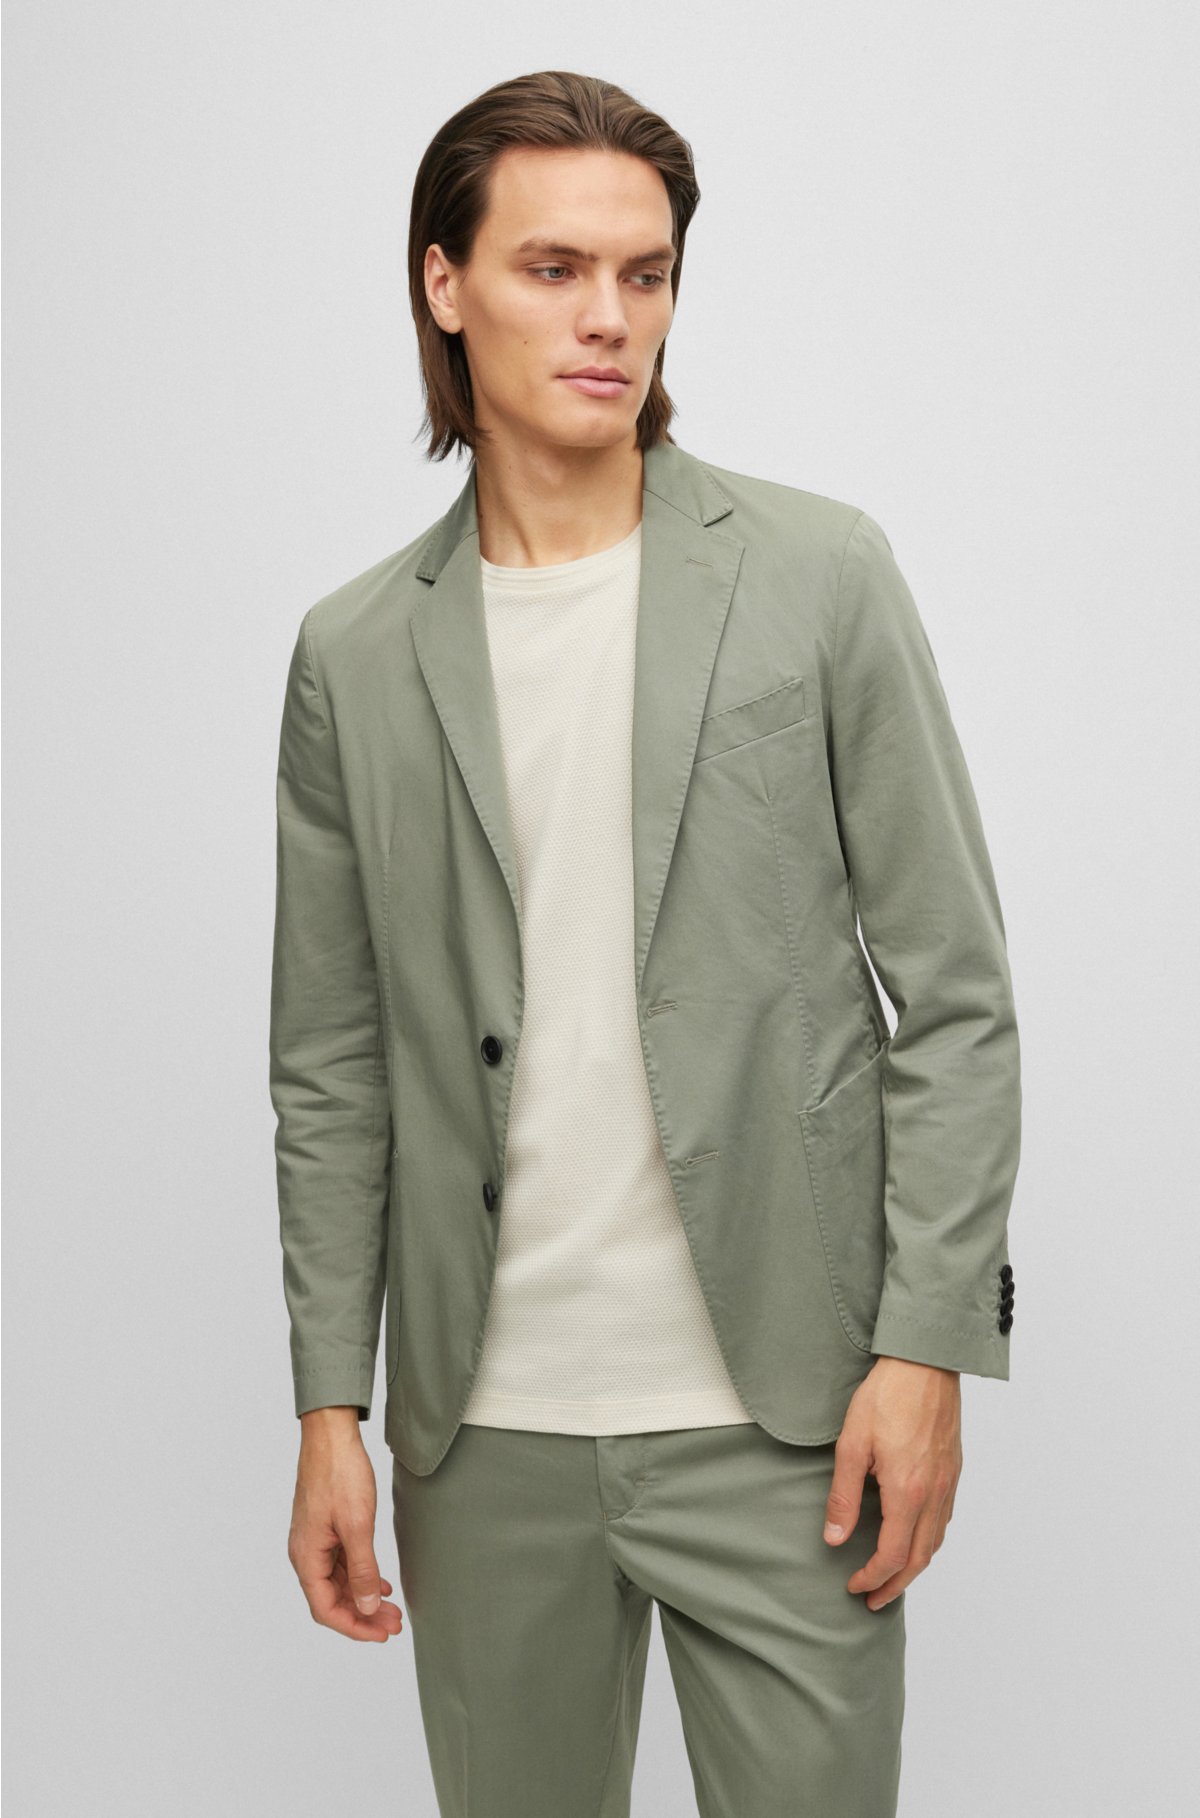 - jacket in a crease-resistant cotton blend